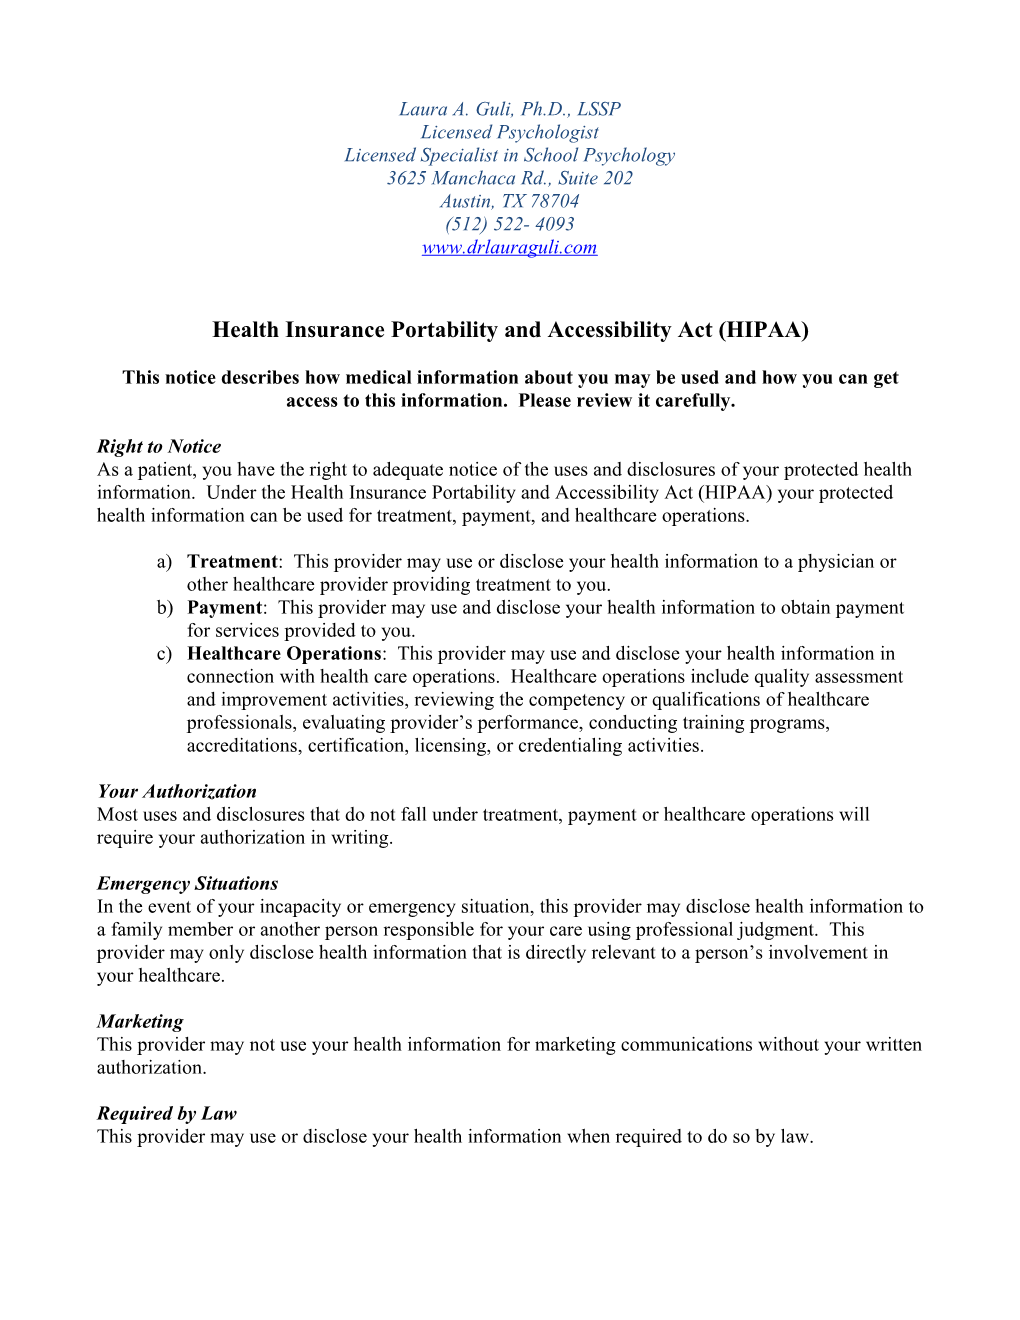 Health Insurance Portability and Accessibility Act (HIPAA)